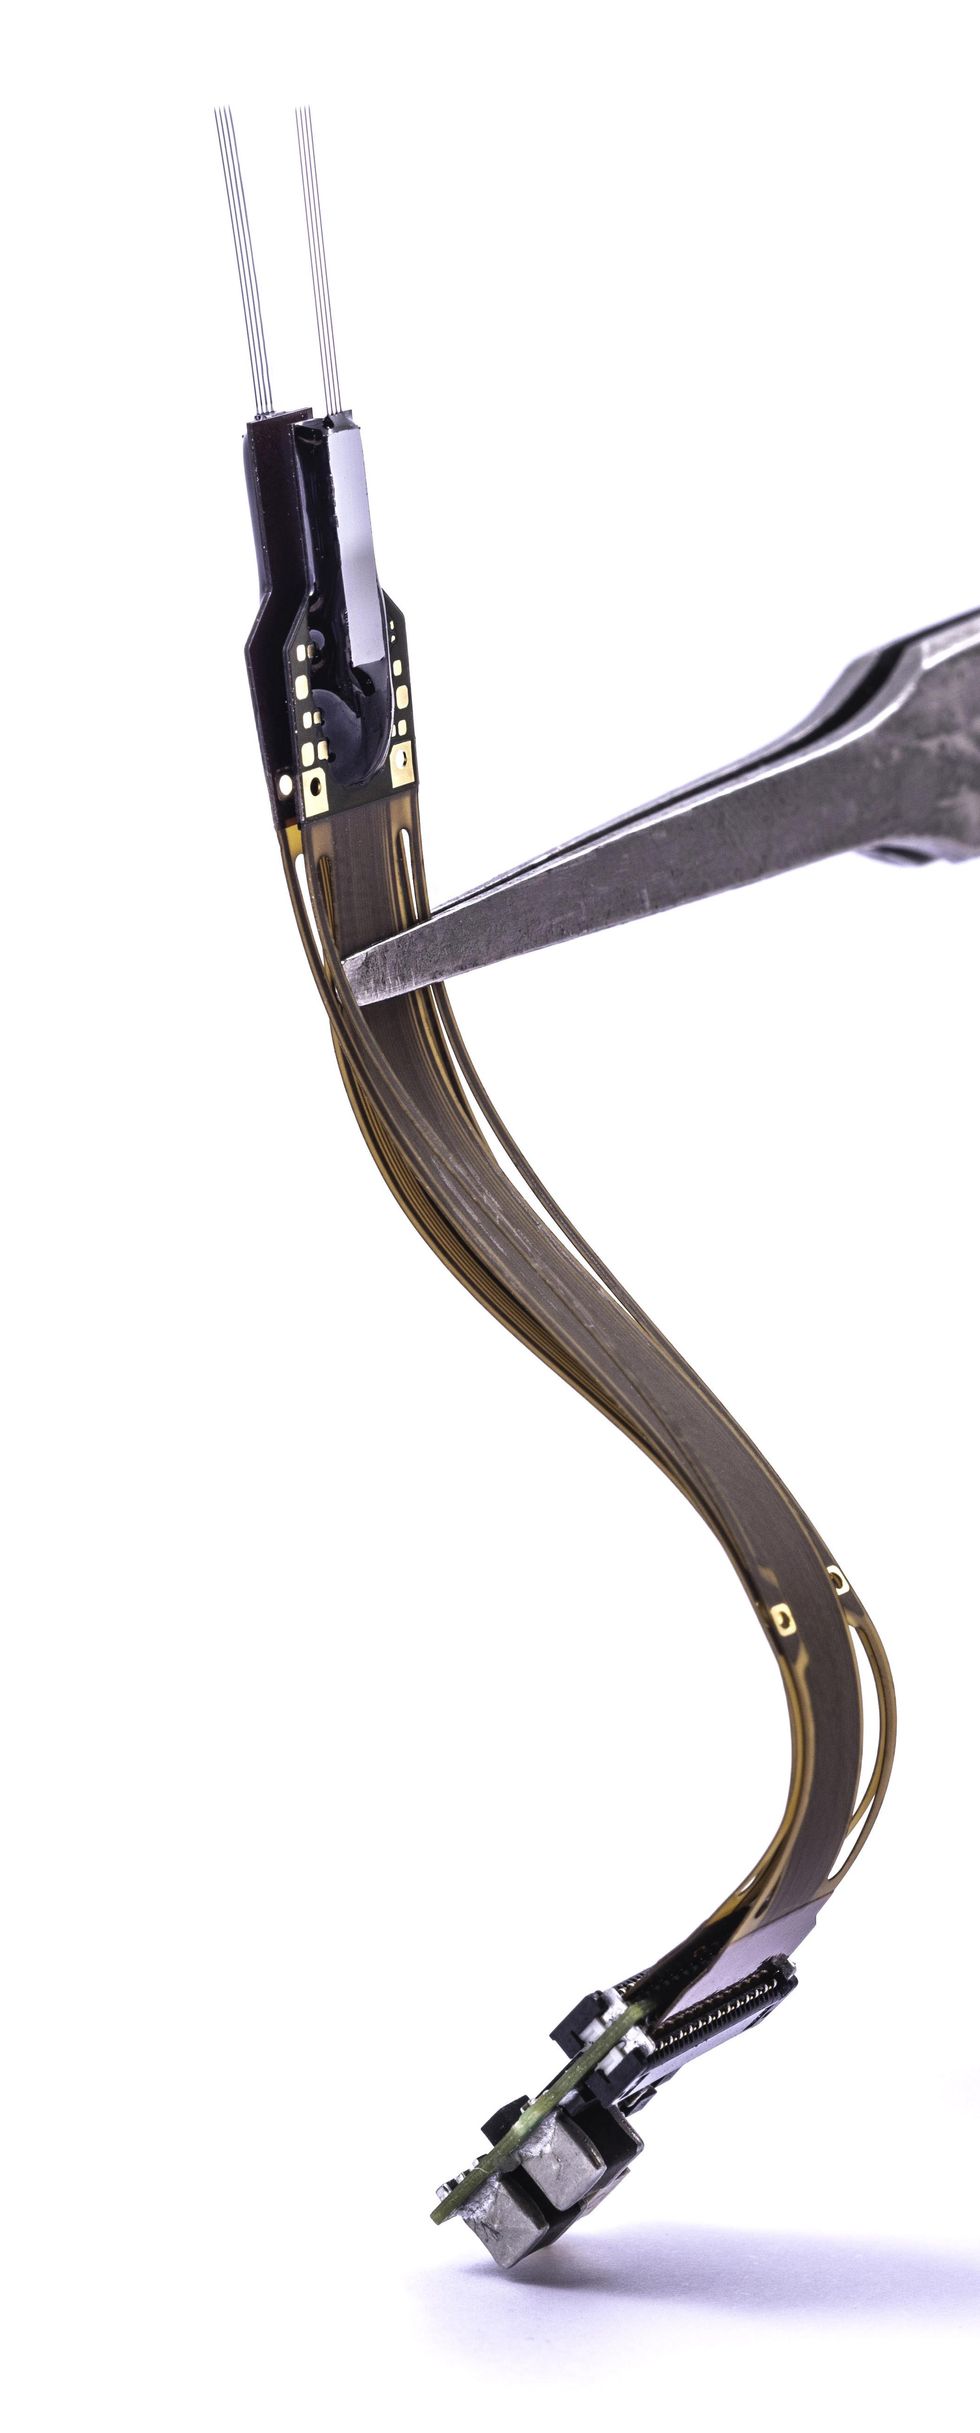 Pliers hold a long and slender electronic device upright. The device has eight delicate wires projecting from its top. 